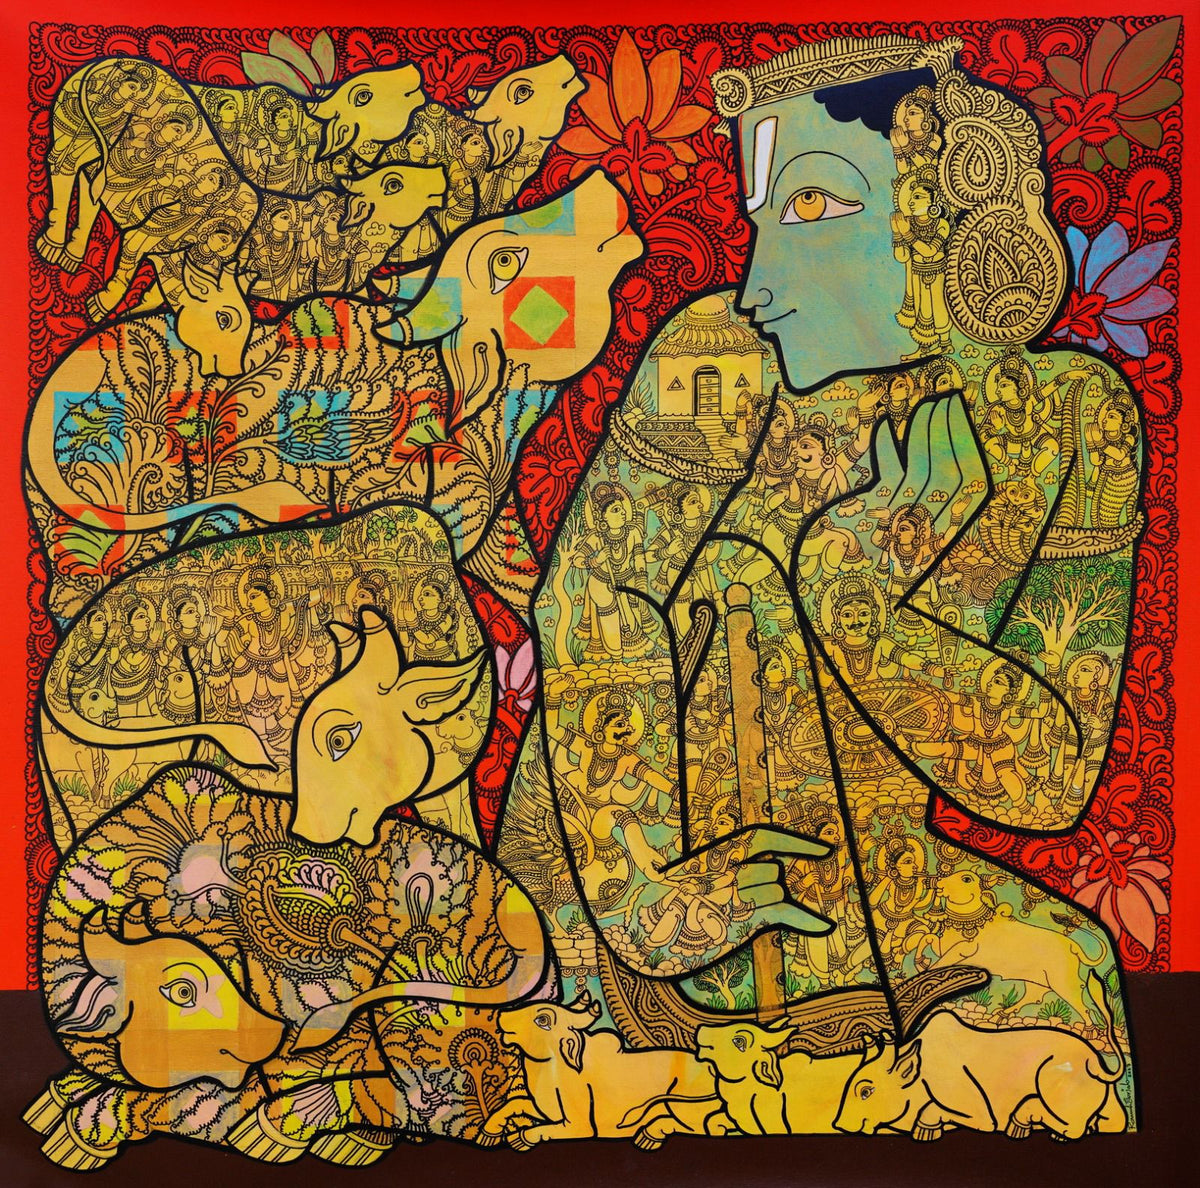 A stunning red and gold tones work with Krishna and hos cows by artist Ramesh Gorjala